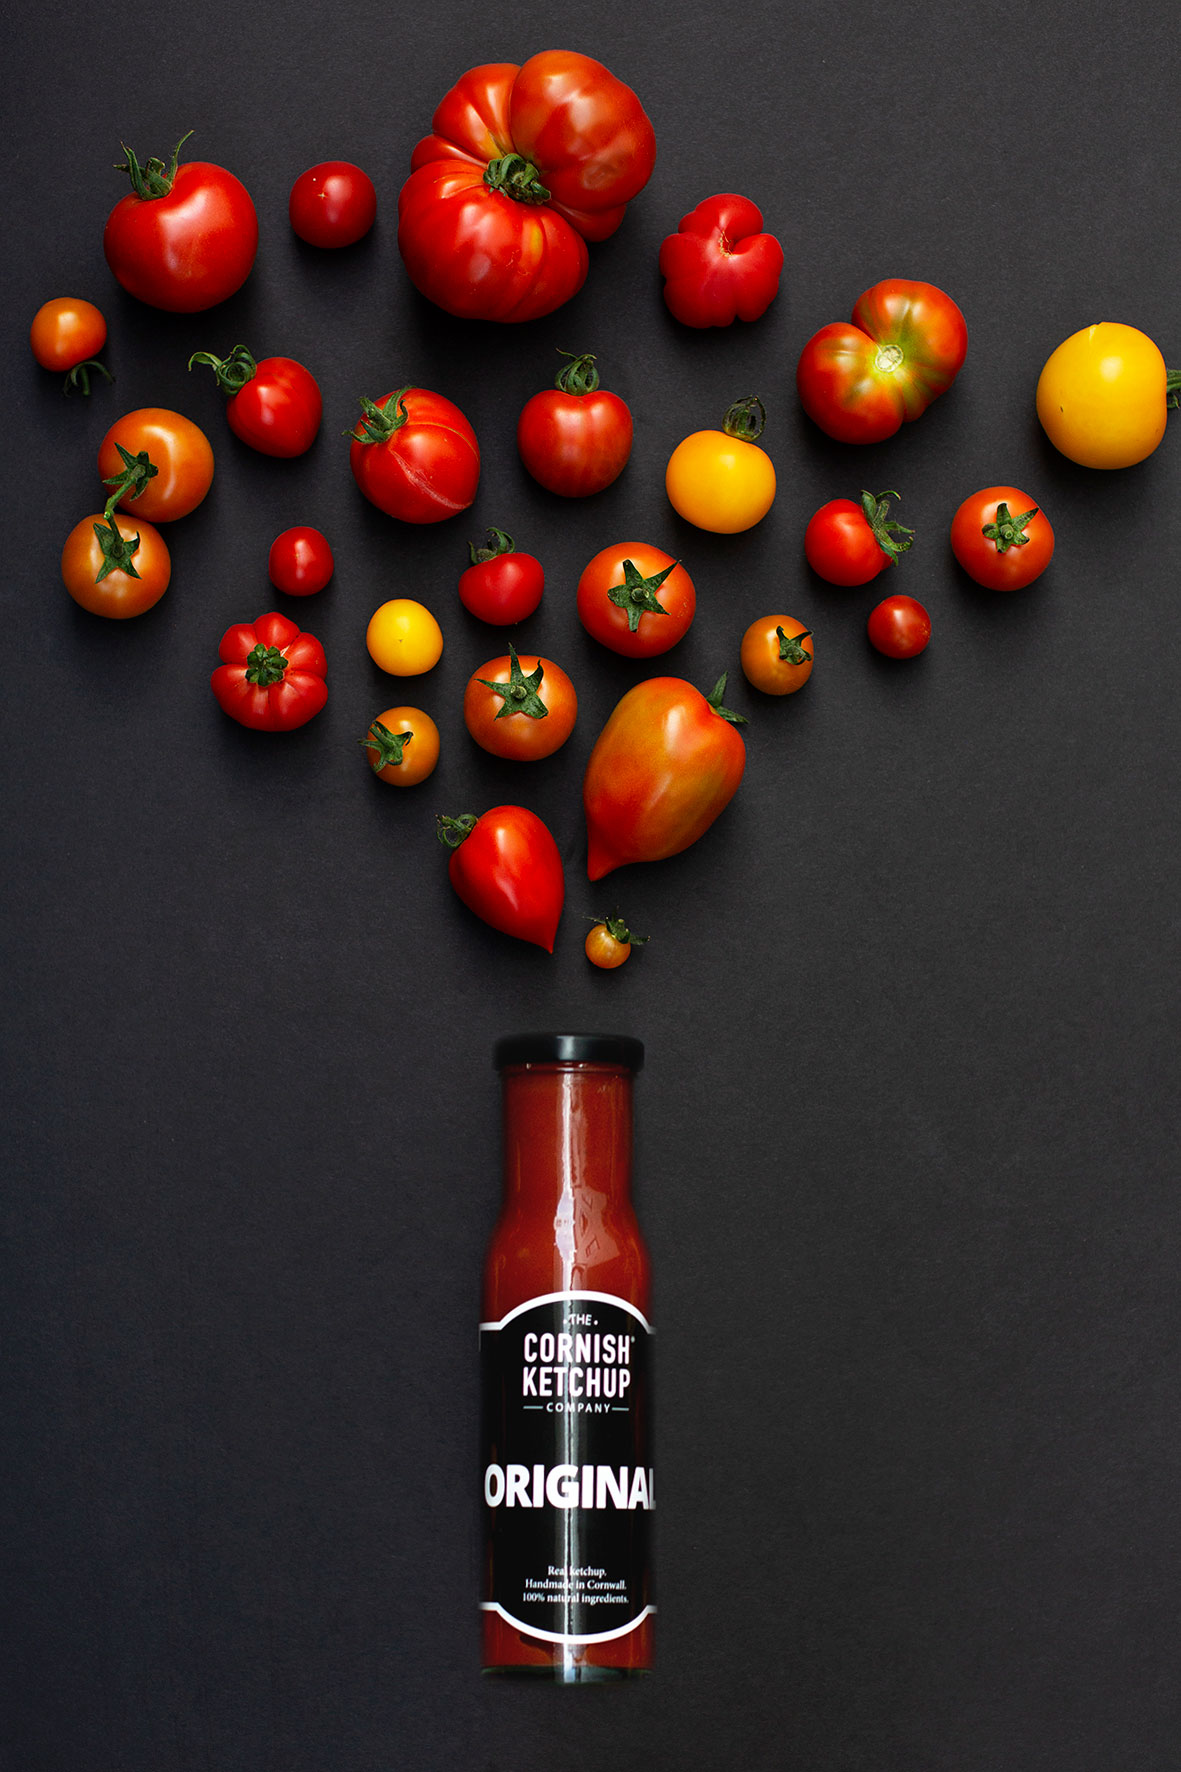 artistic photo of heritage tomatoes arranged above a bottle of ketchup on a black background